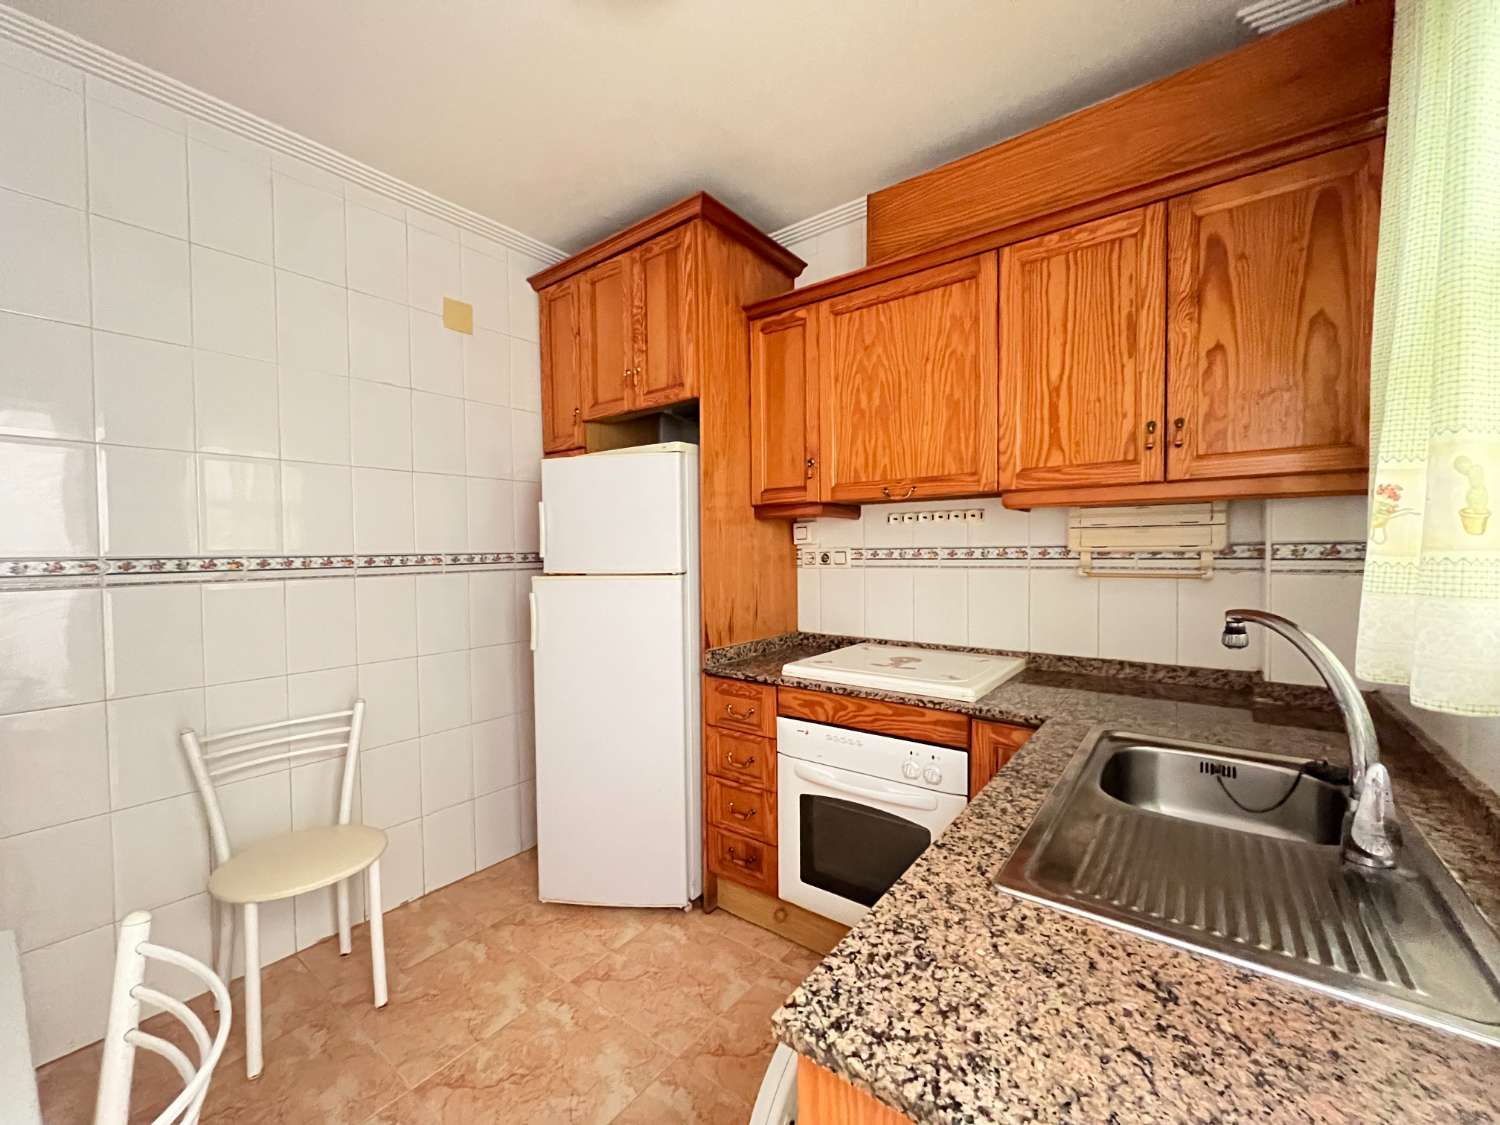 Duplex with 2 bedrooms and 1 bathroom in Torrevieja